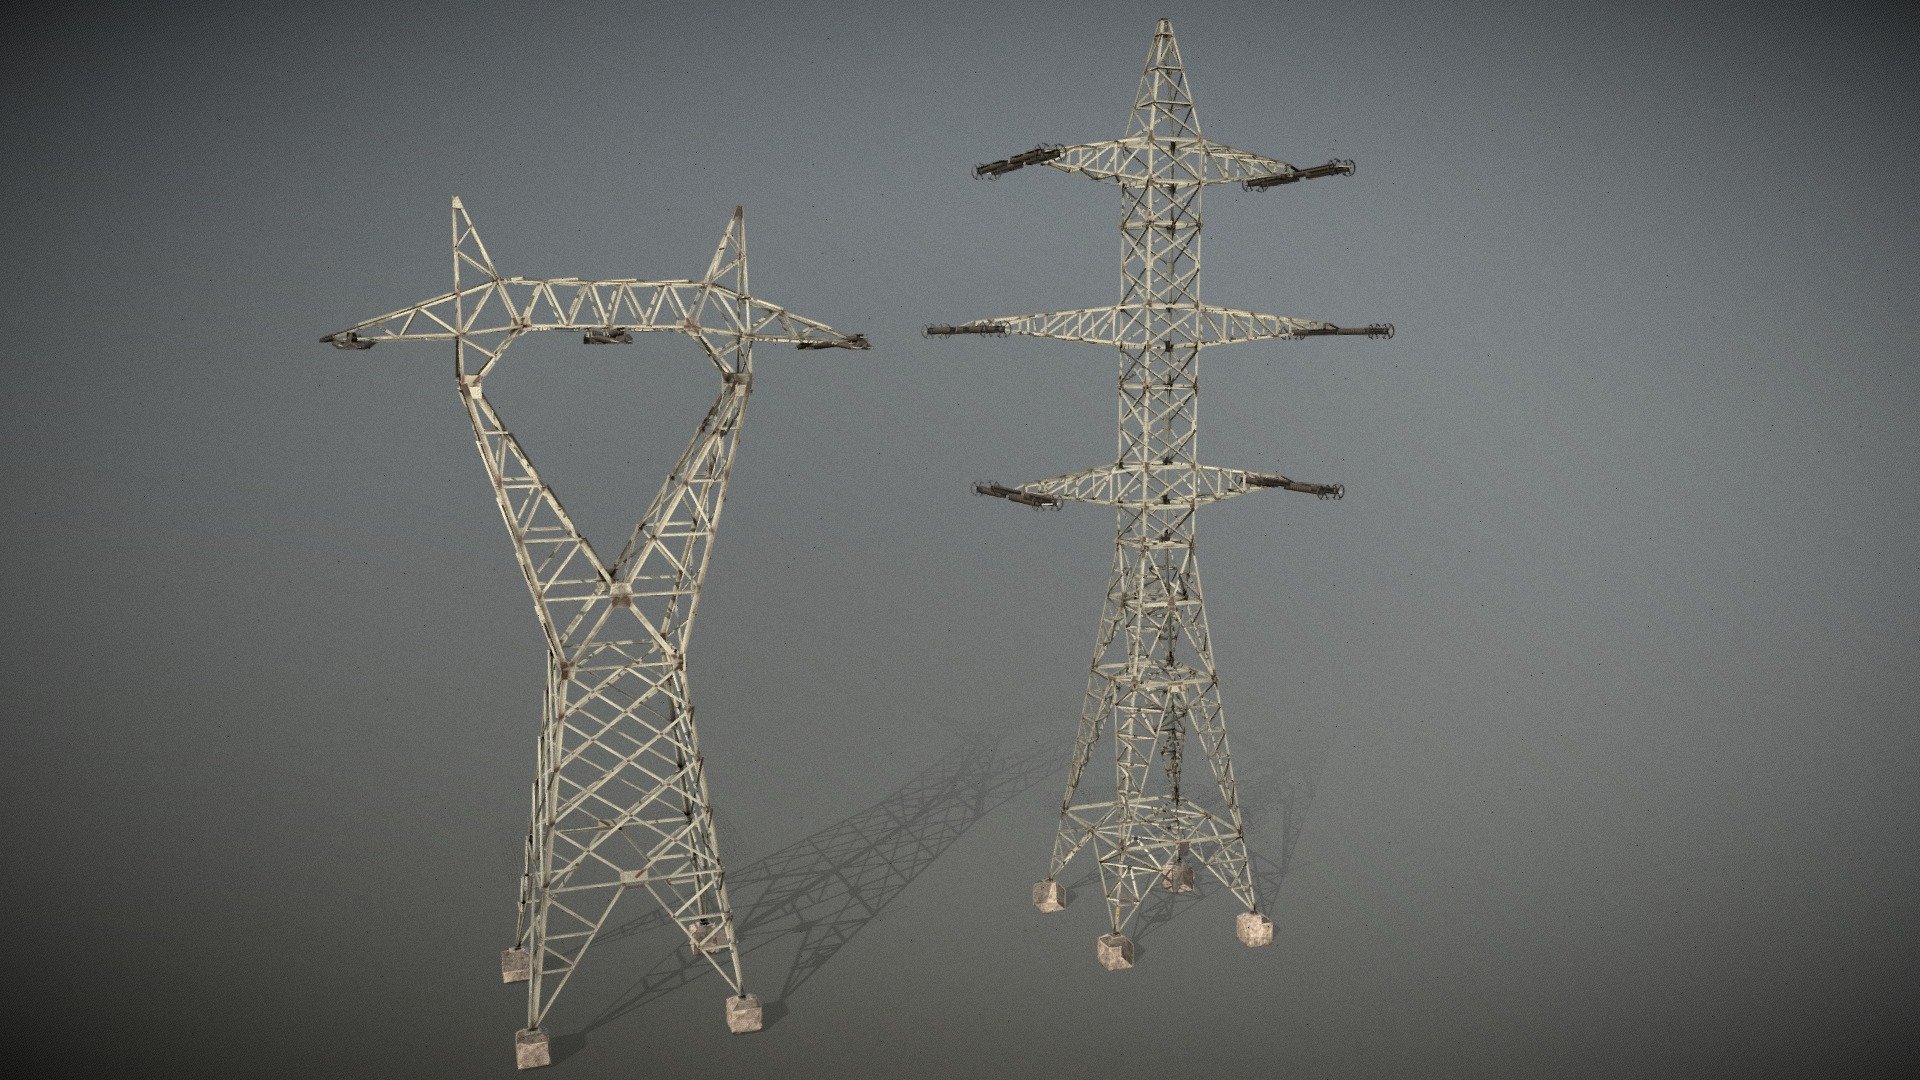 Two high voltage towers.
Enjoyed modeling this one, tried to make it relatively low polygons. After modeling i did all texturing in SubstancePainter. I think there is something fascinating in this metal constructions. 

Planning to use them as background props in open air scene in UE4 3d model